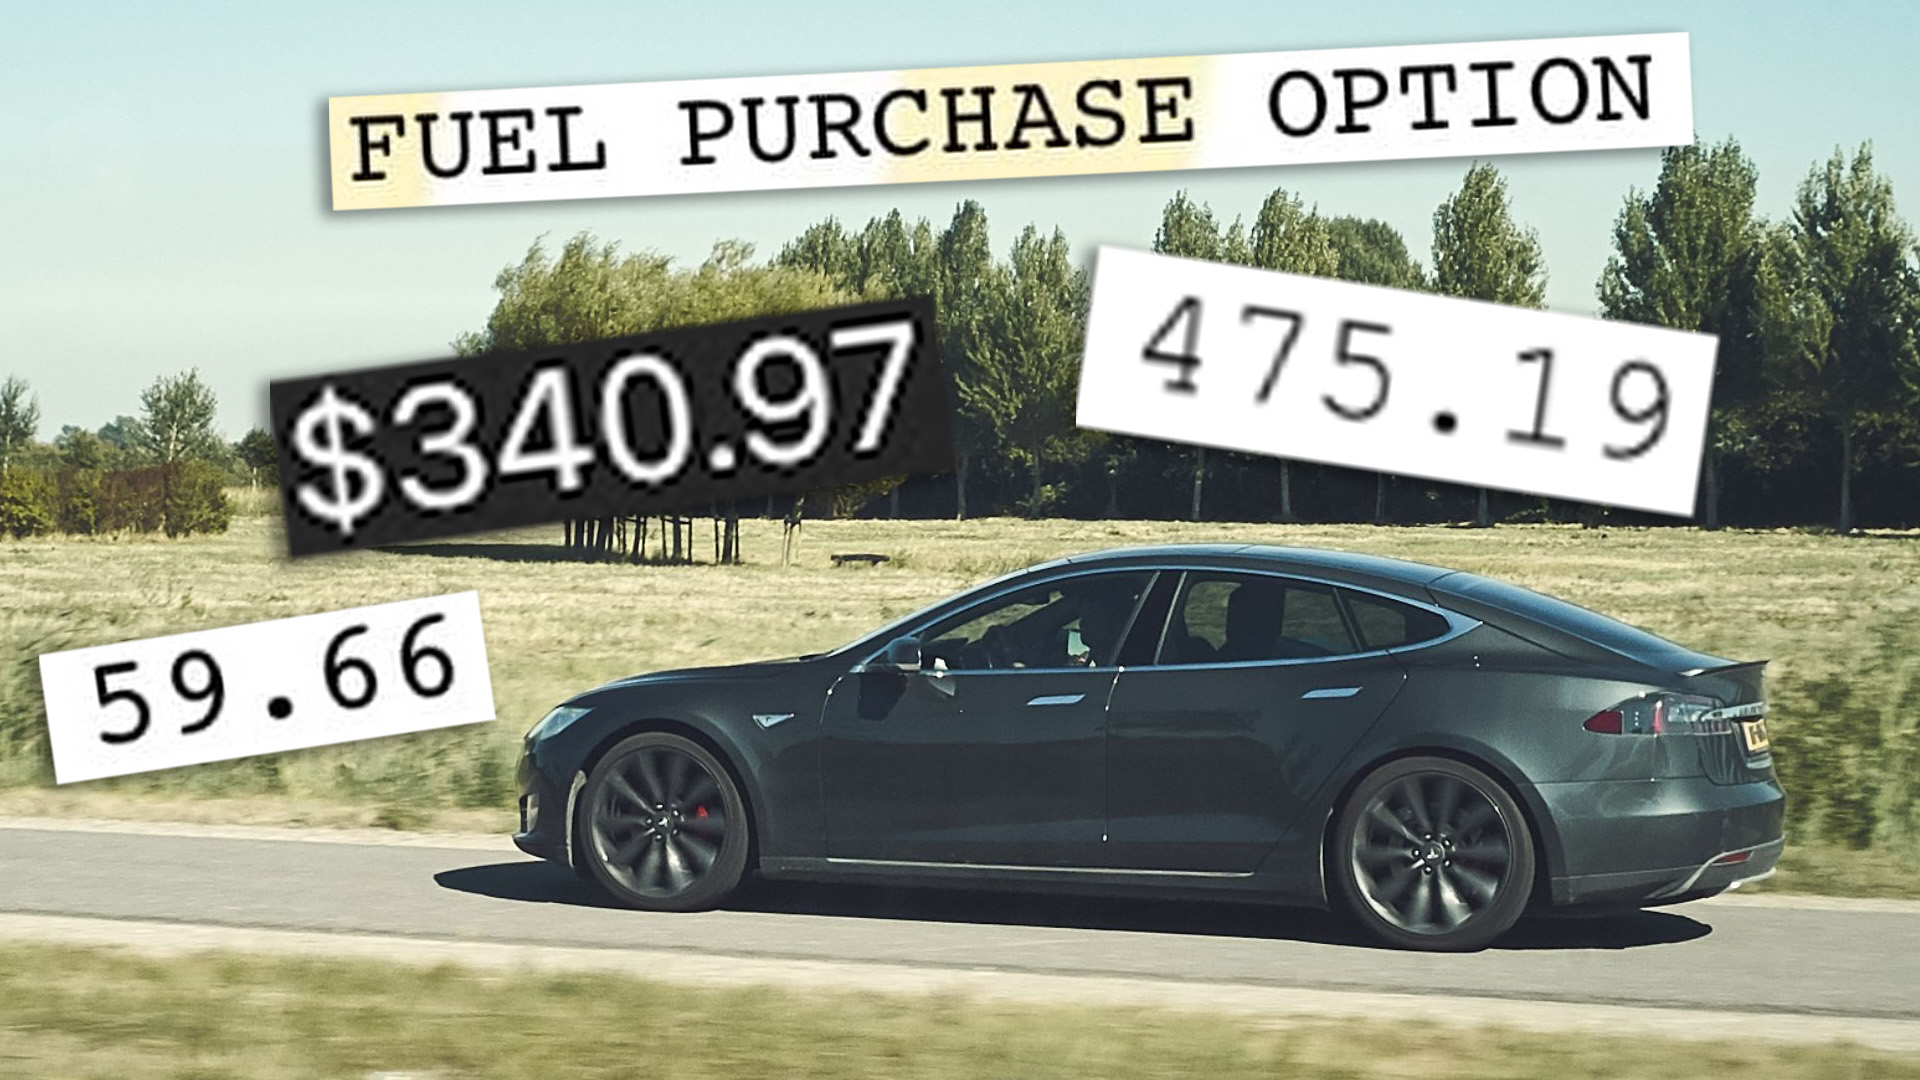 A Tesla Model S drives along a road with crops from Hertz invoices for exorbitant fuel charges overlaid